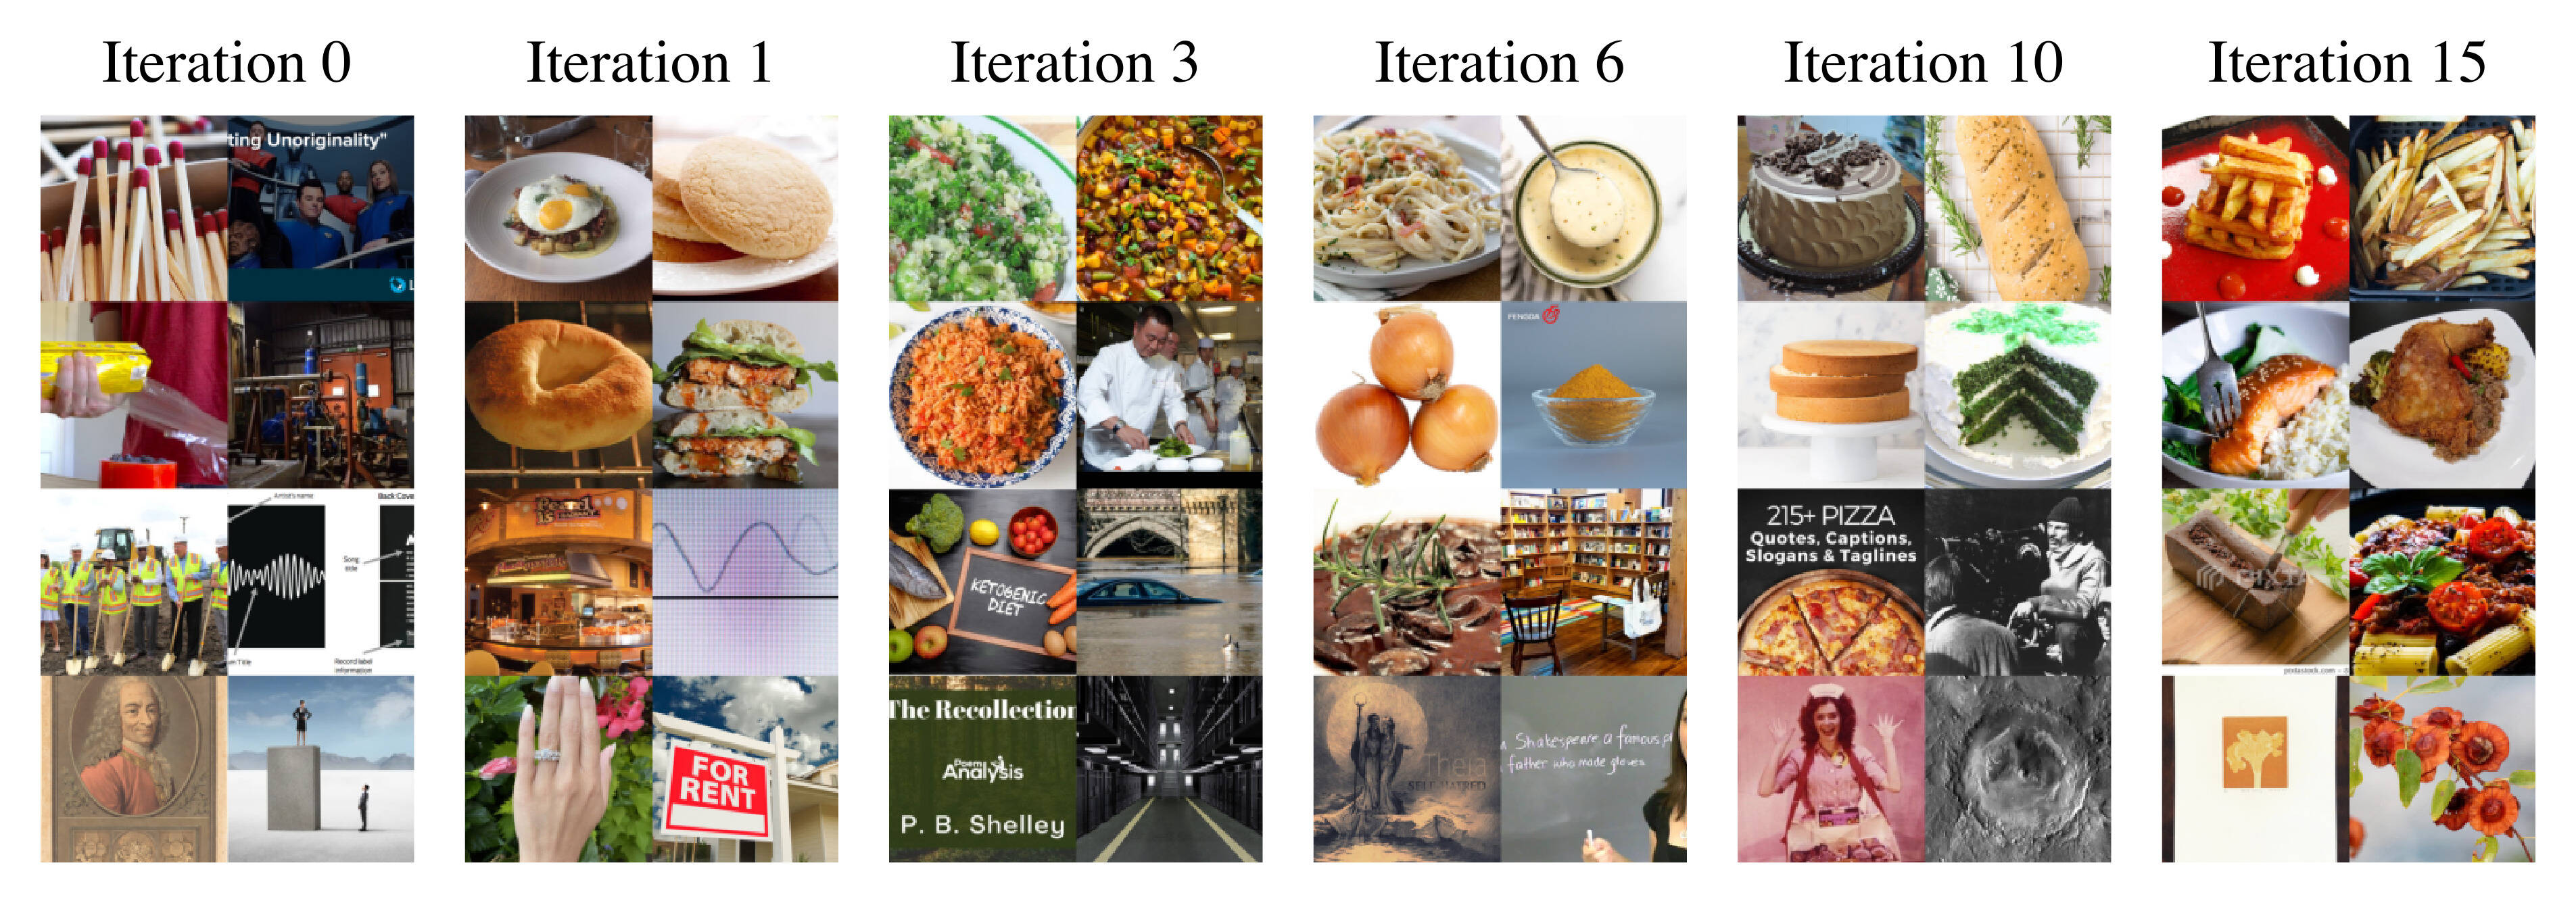 Food progression over iterations.